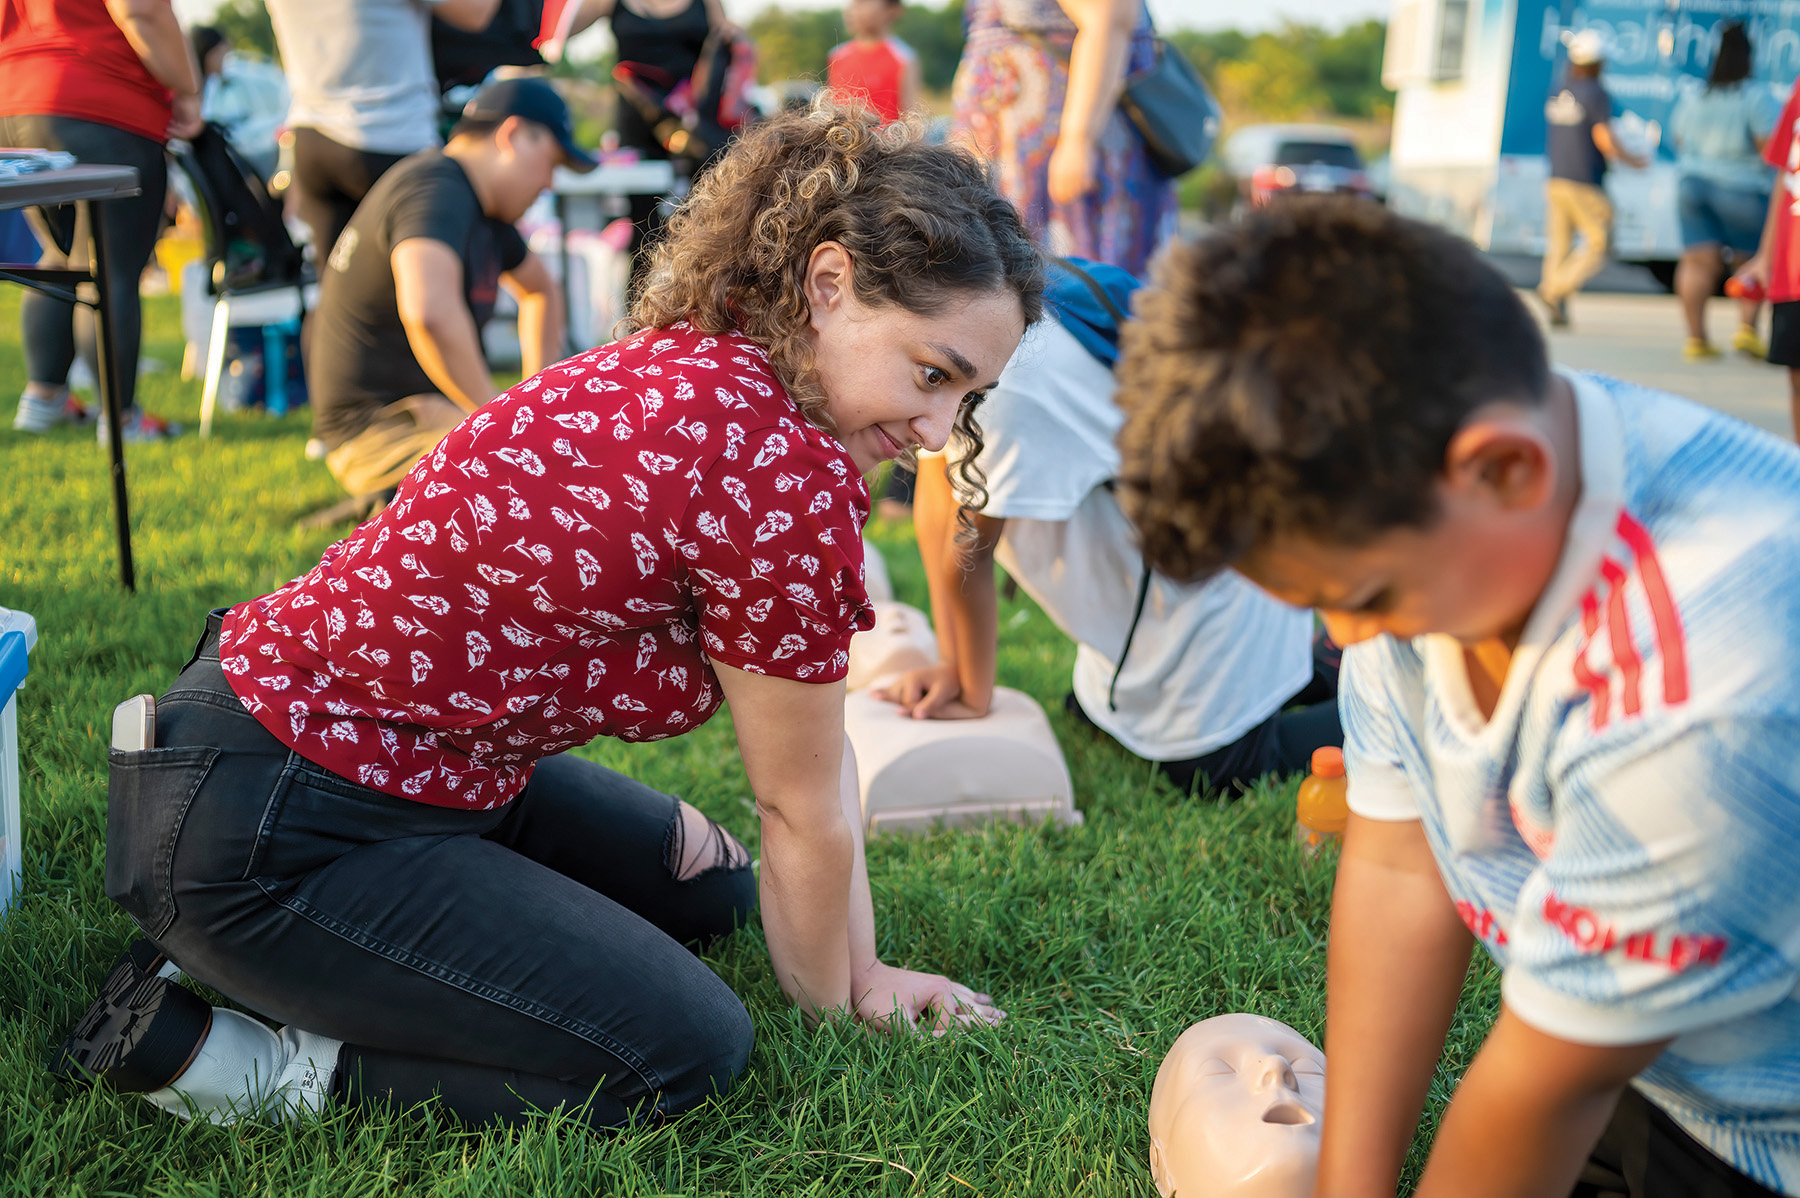 Student showing how to do CPR at an offsite community event.